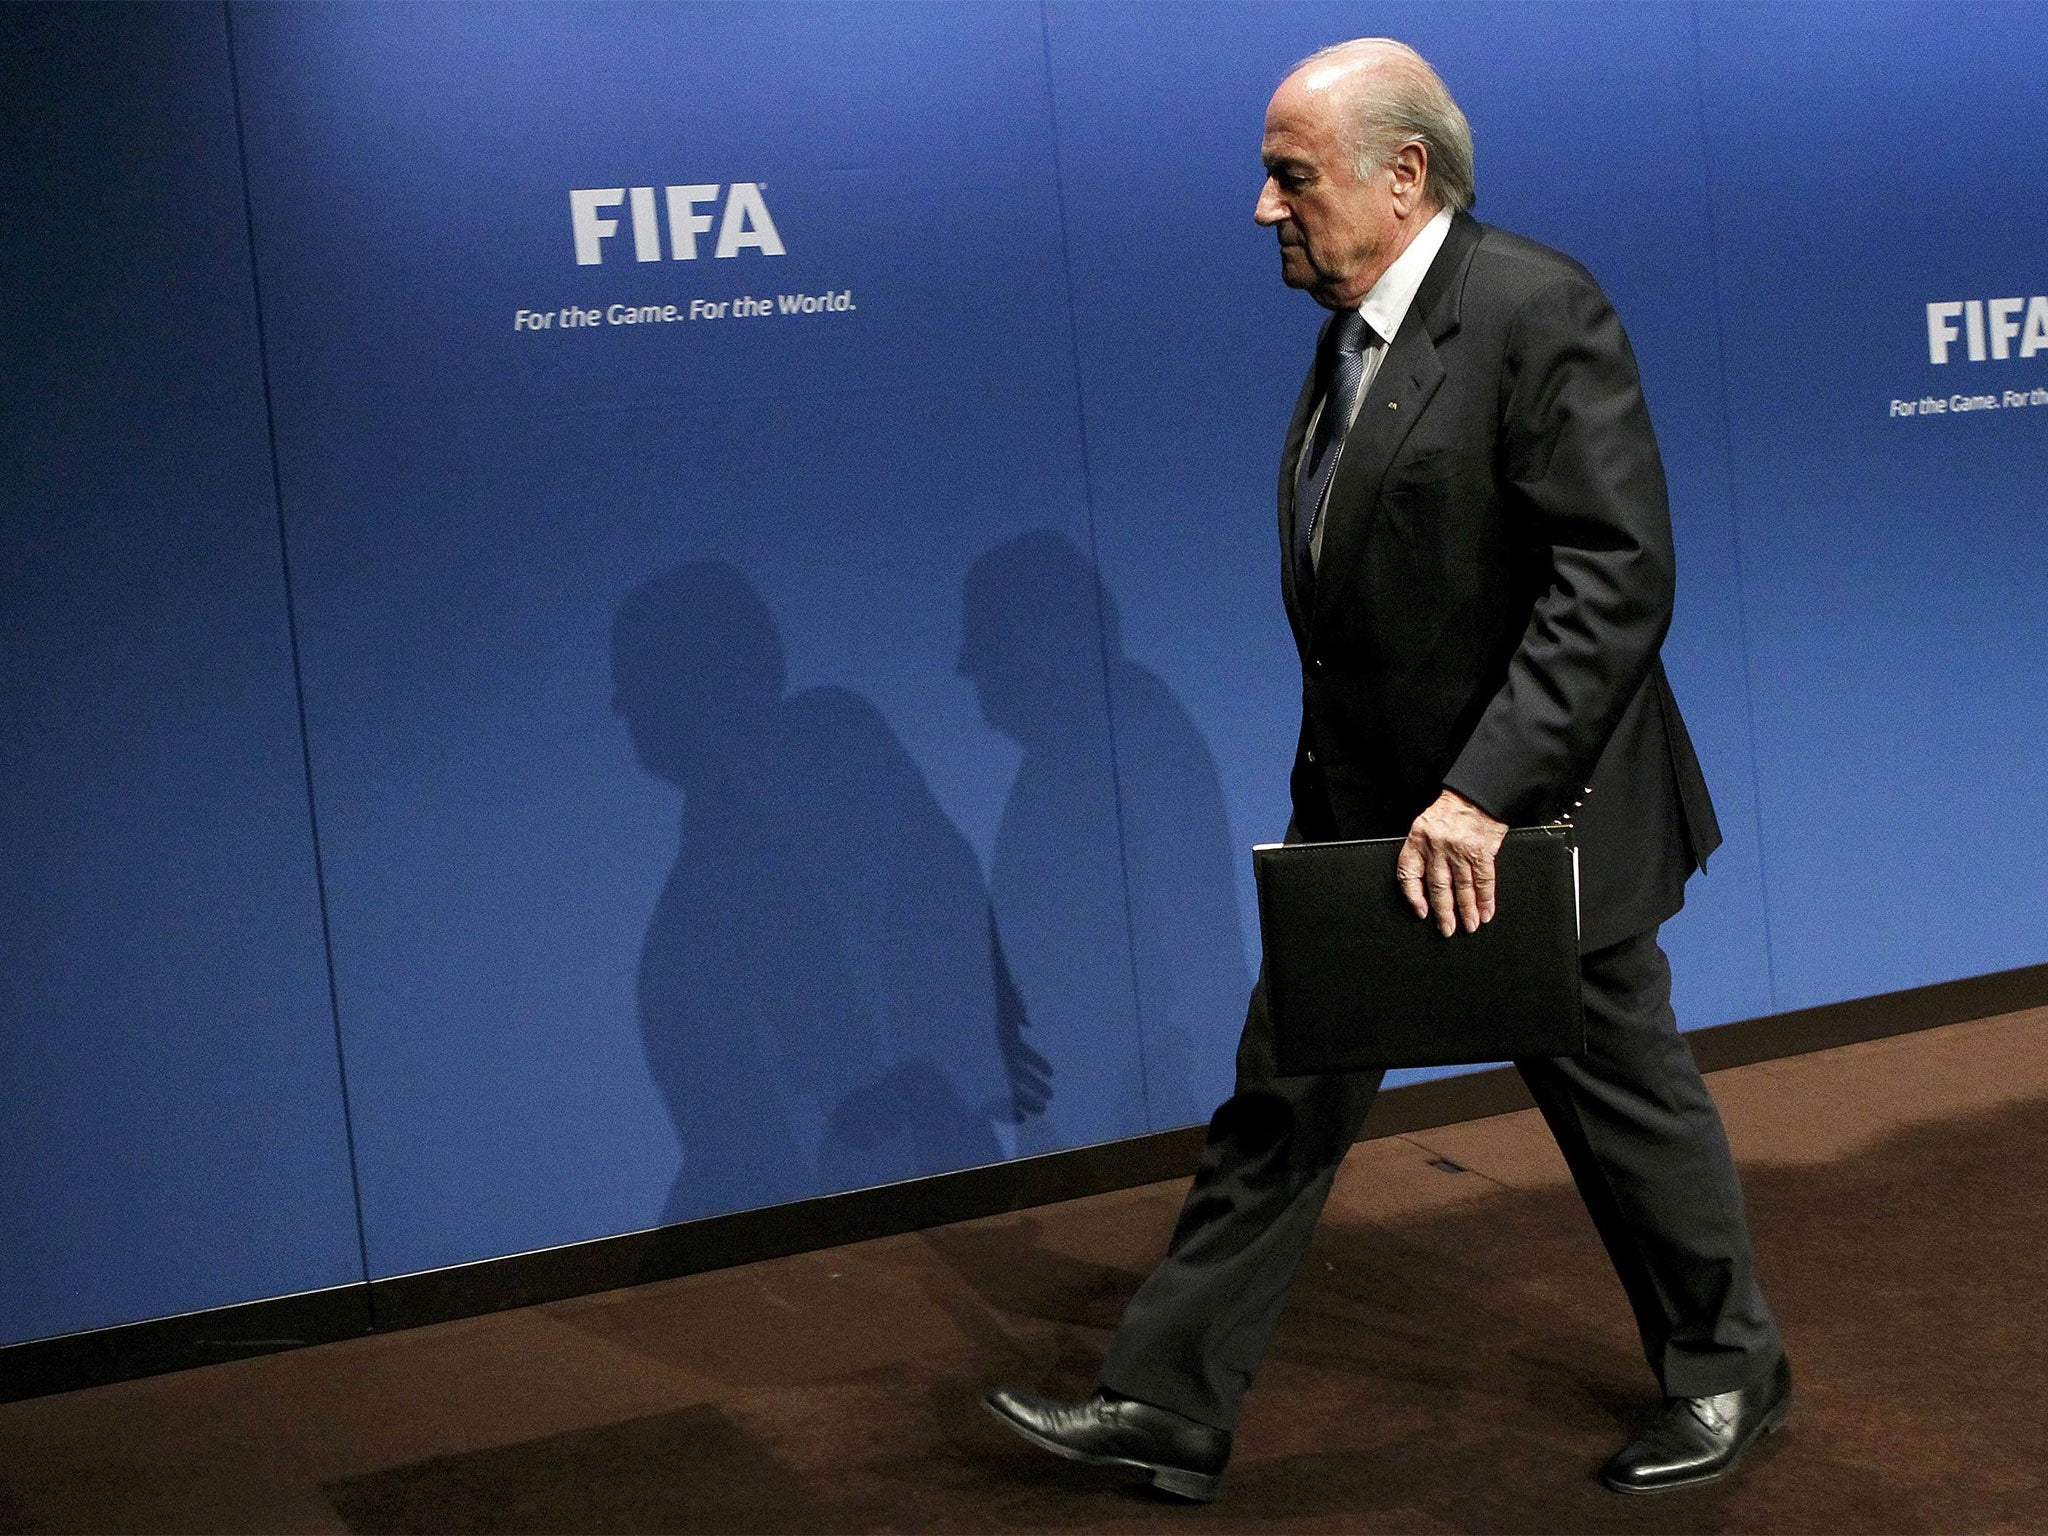 Sepp Blatter will miss his third successive scheduled appearance since the corruption arrests